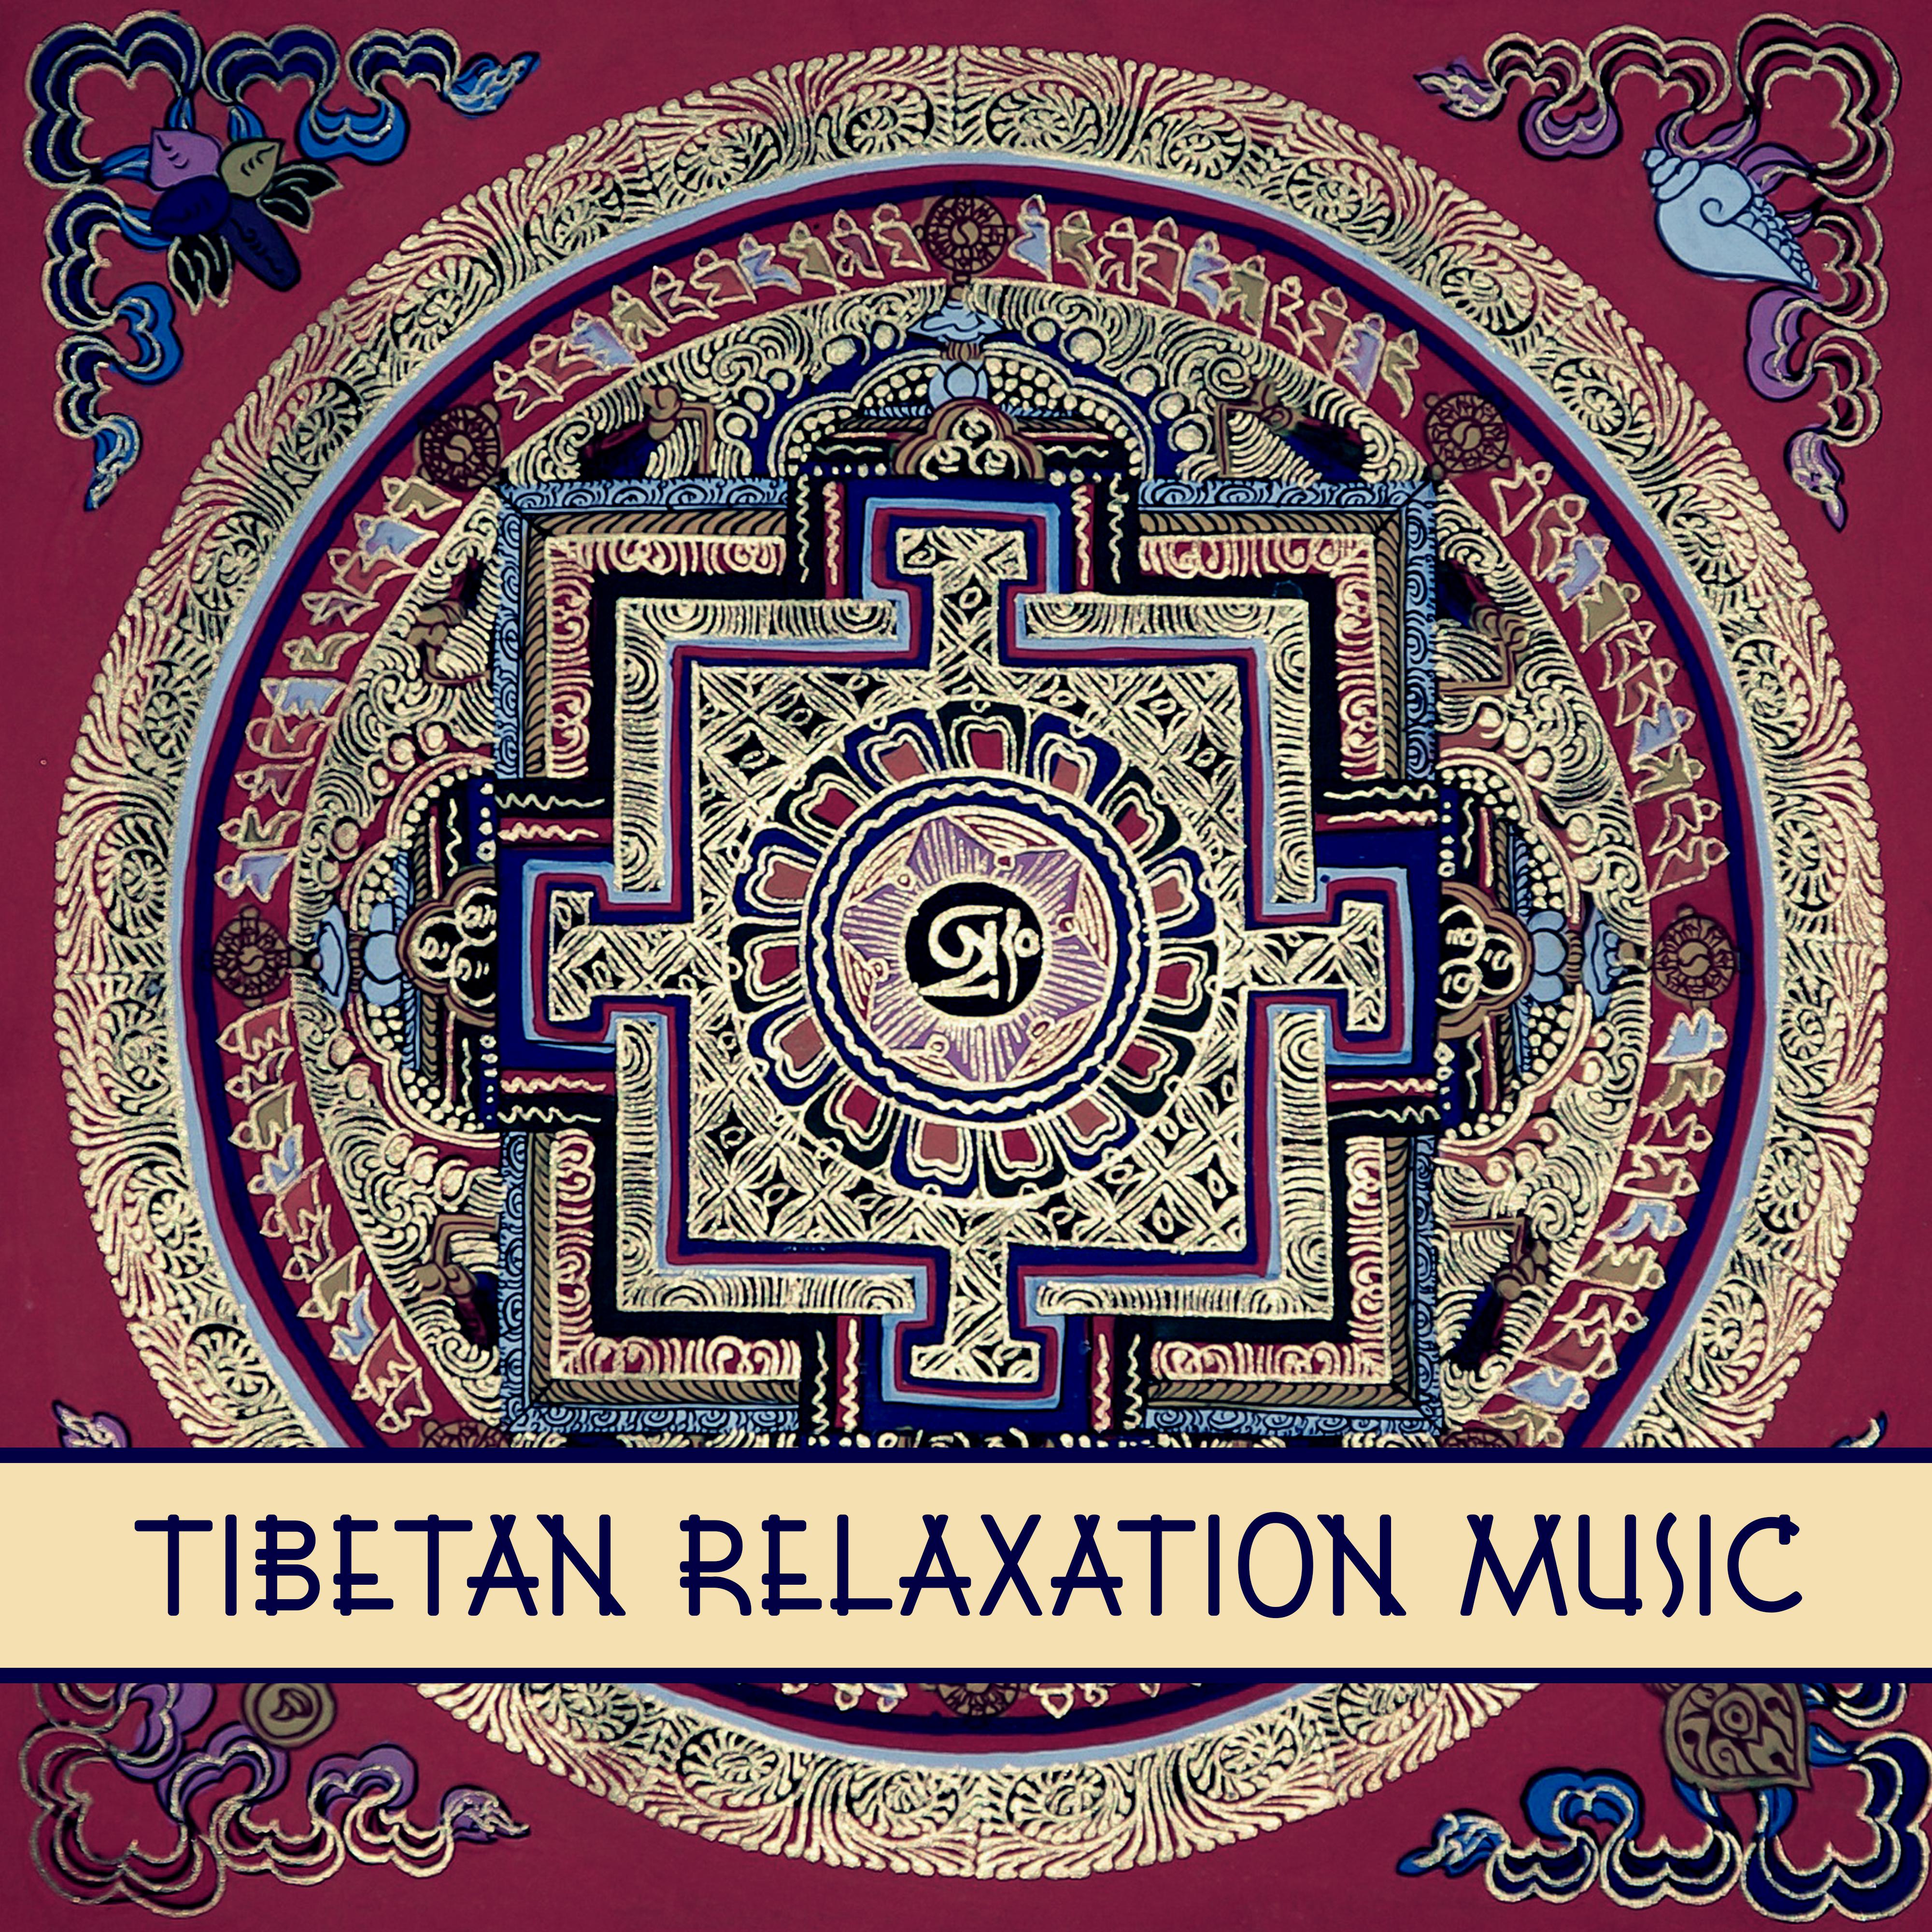 Tibetan Relaxation Music  Soft Sounds of Nature, Relaxing Music, Deep New Age, Meditate, Yoga Music